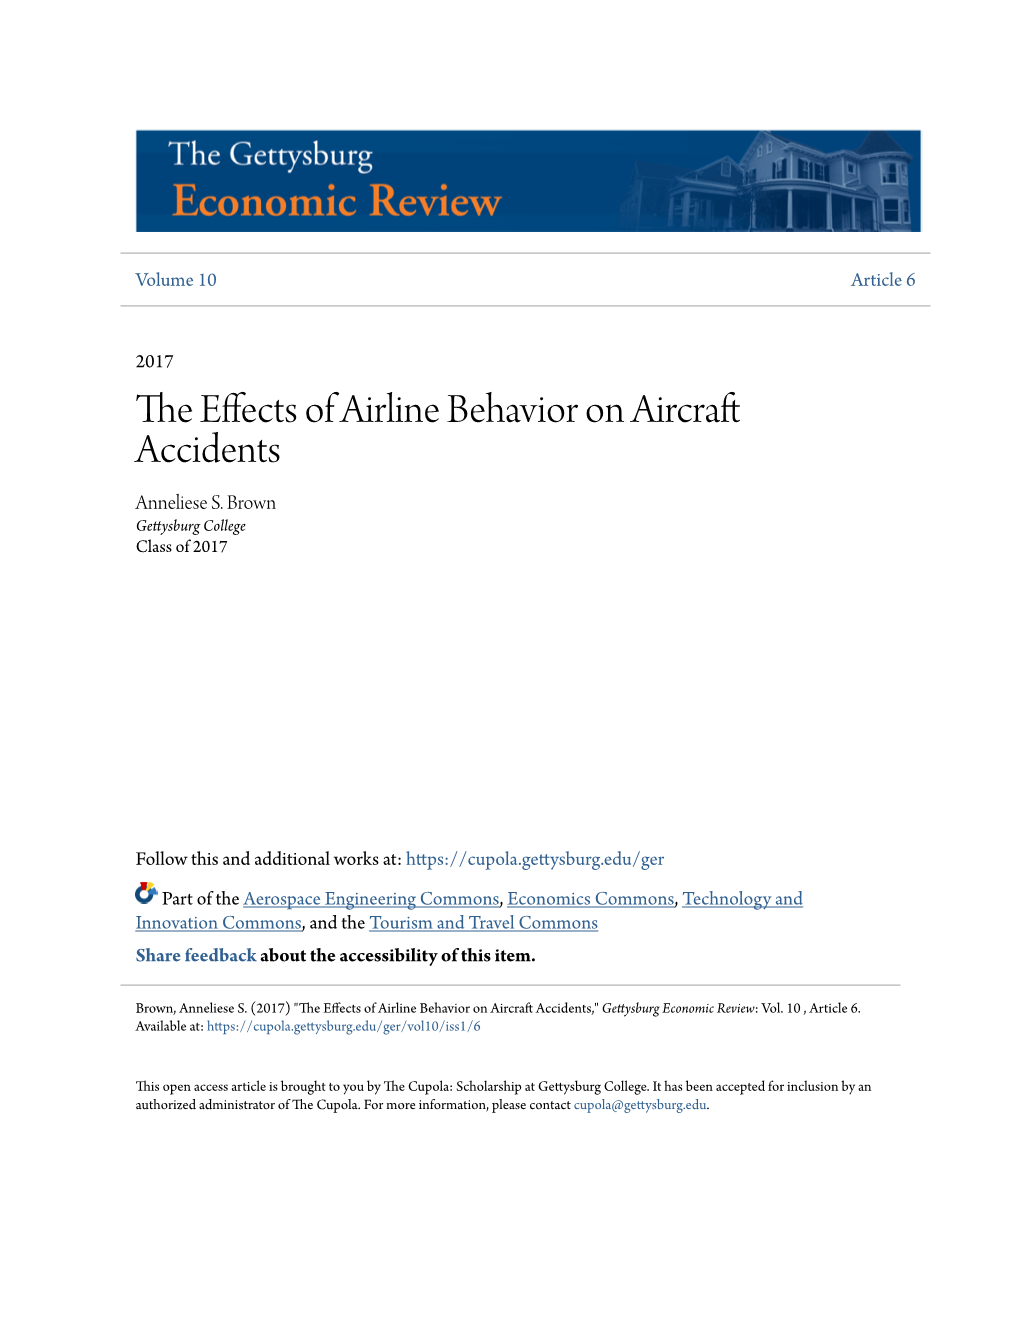 The Effects of Airline Behavior on Aircraft Accidents," Gettysburg Economic Review: Vol